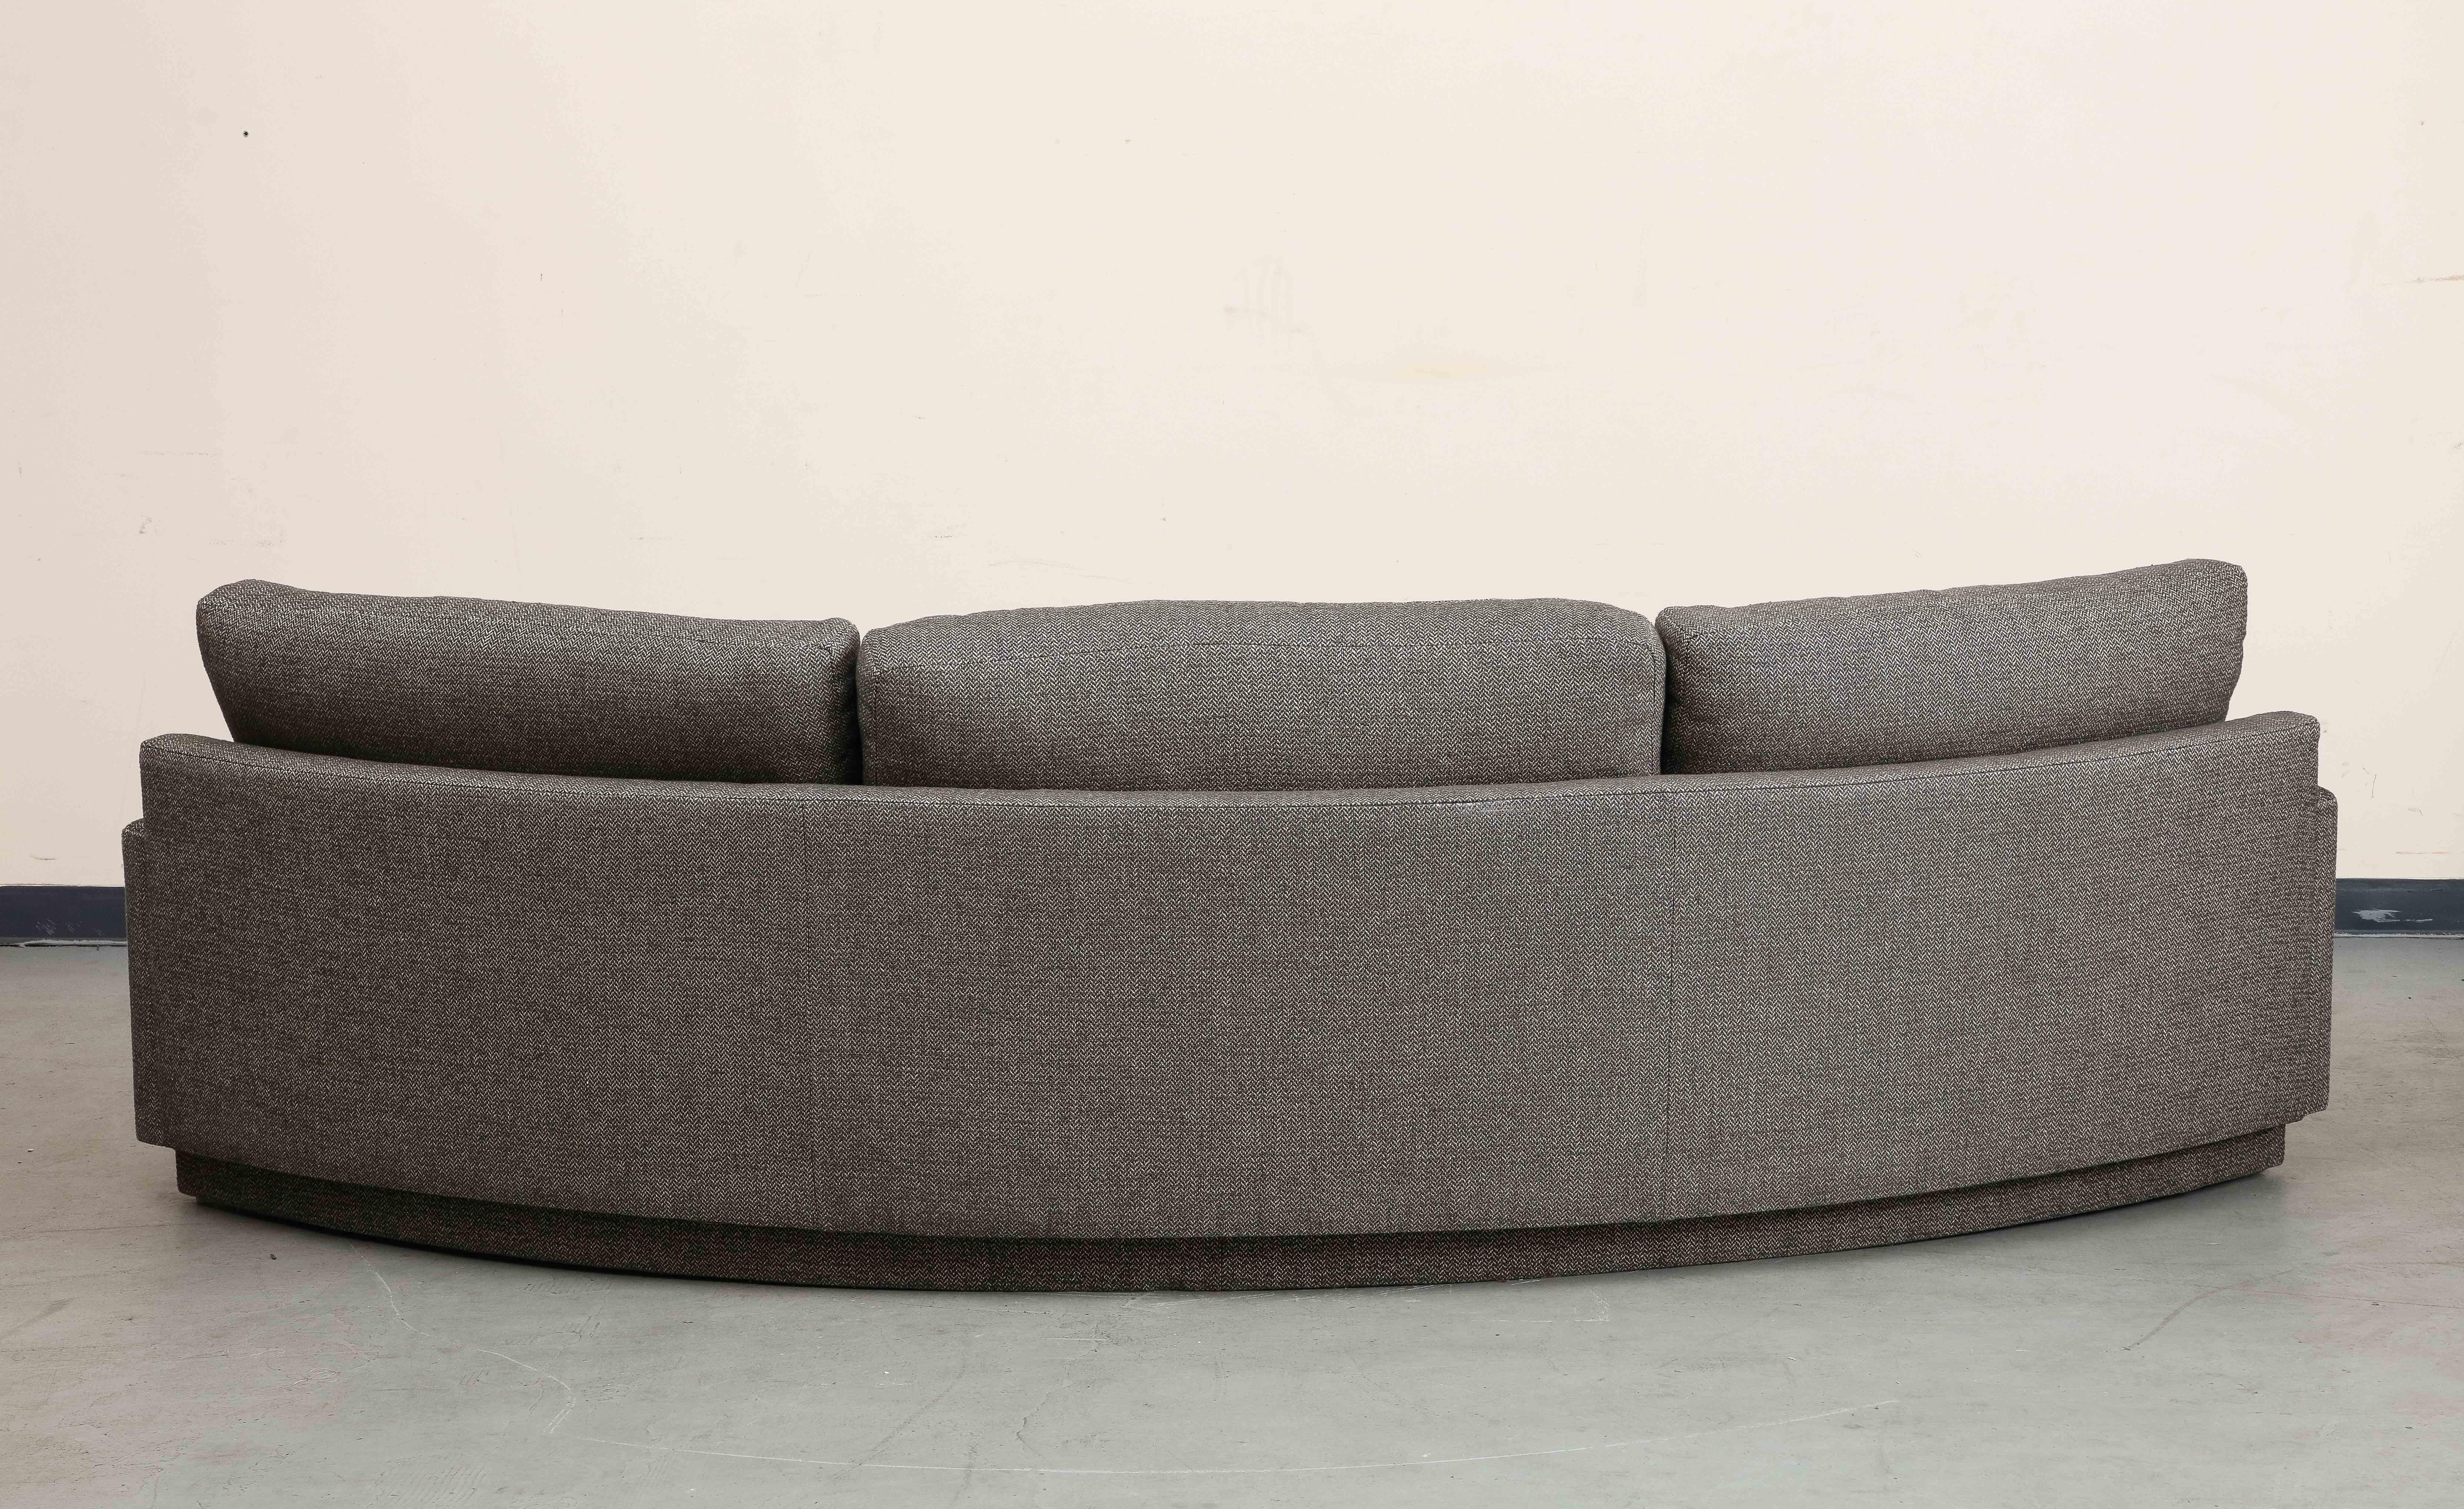 Milo Baughman Curved Three Seat Sofa, 1970, Newly Upholstered in Cotton Linen In Good Condition For Sale In Chicago, IL